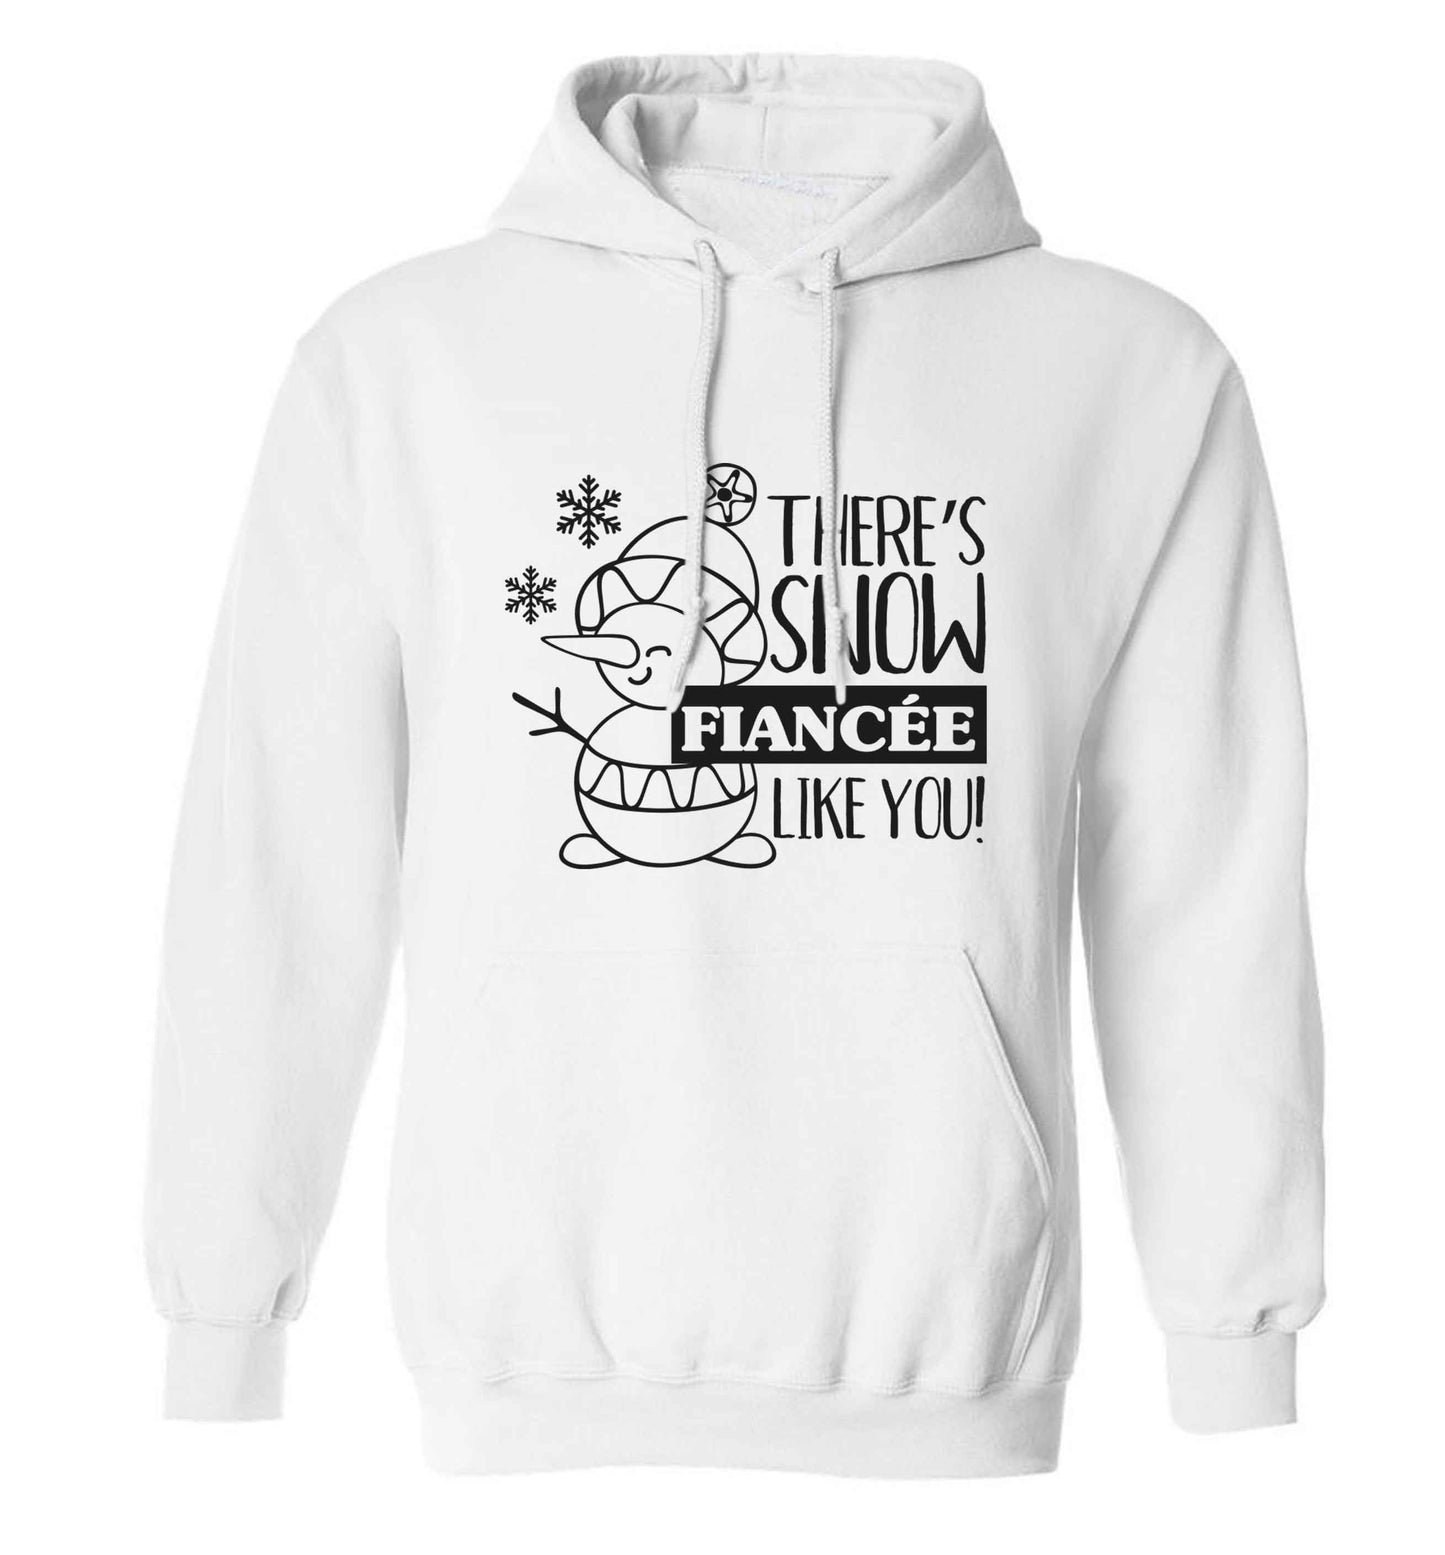 There's snow fiancee like you adults unisex white hoodie 2XL